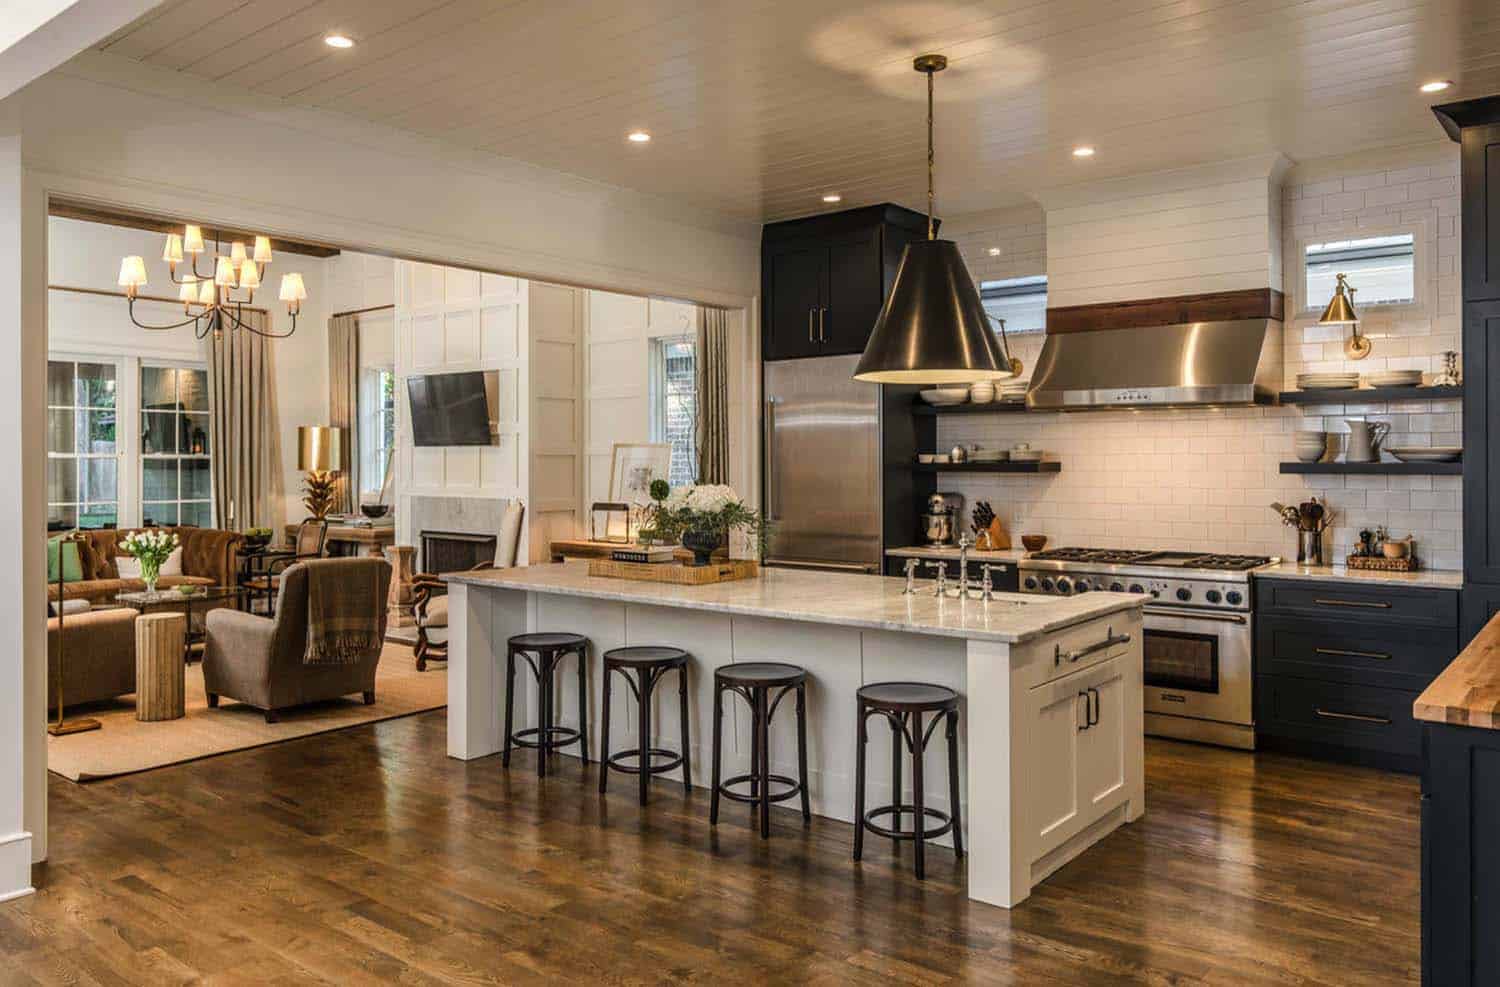 Cape Dutch style home in Tennessee opens to stylish interiors